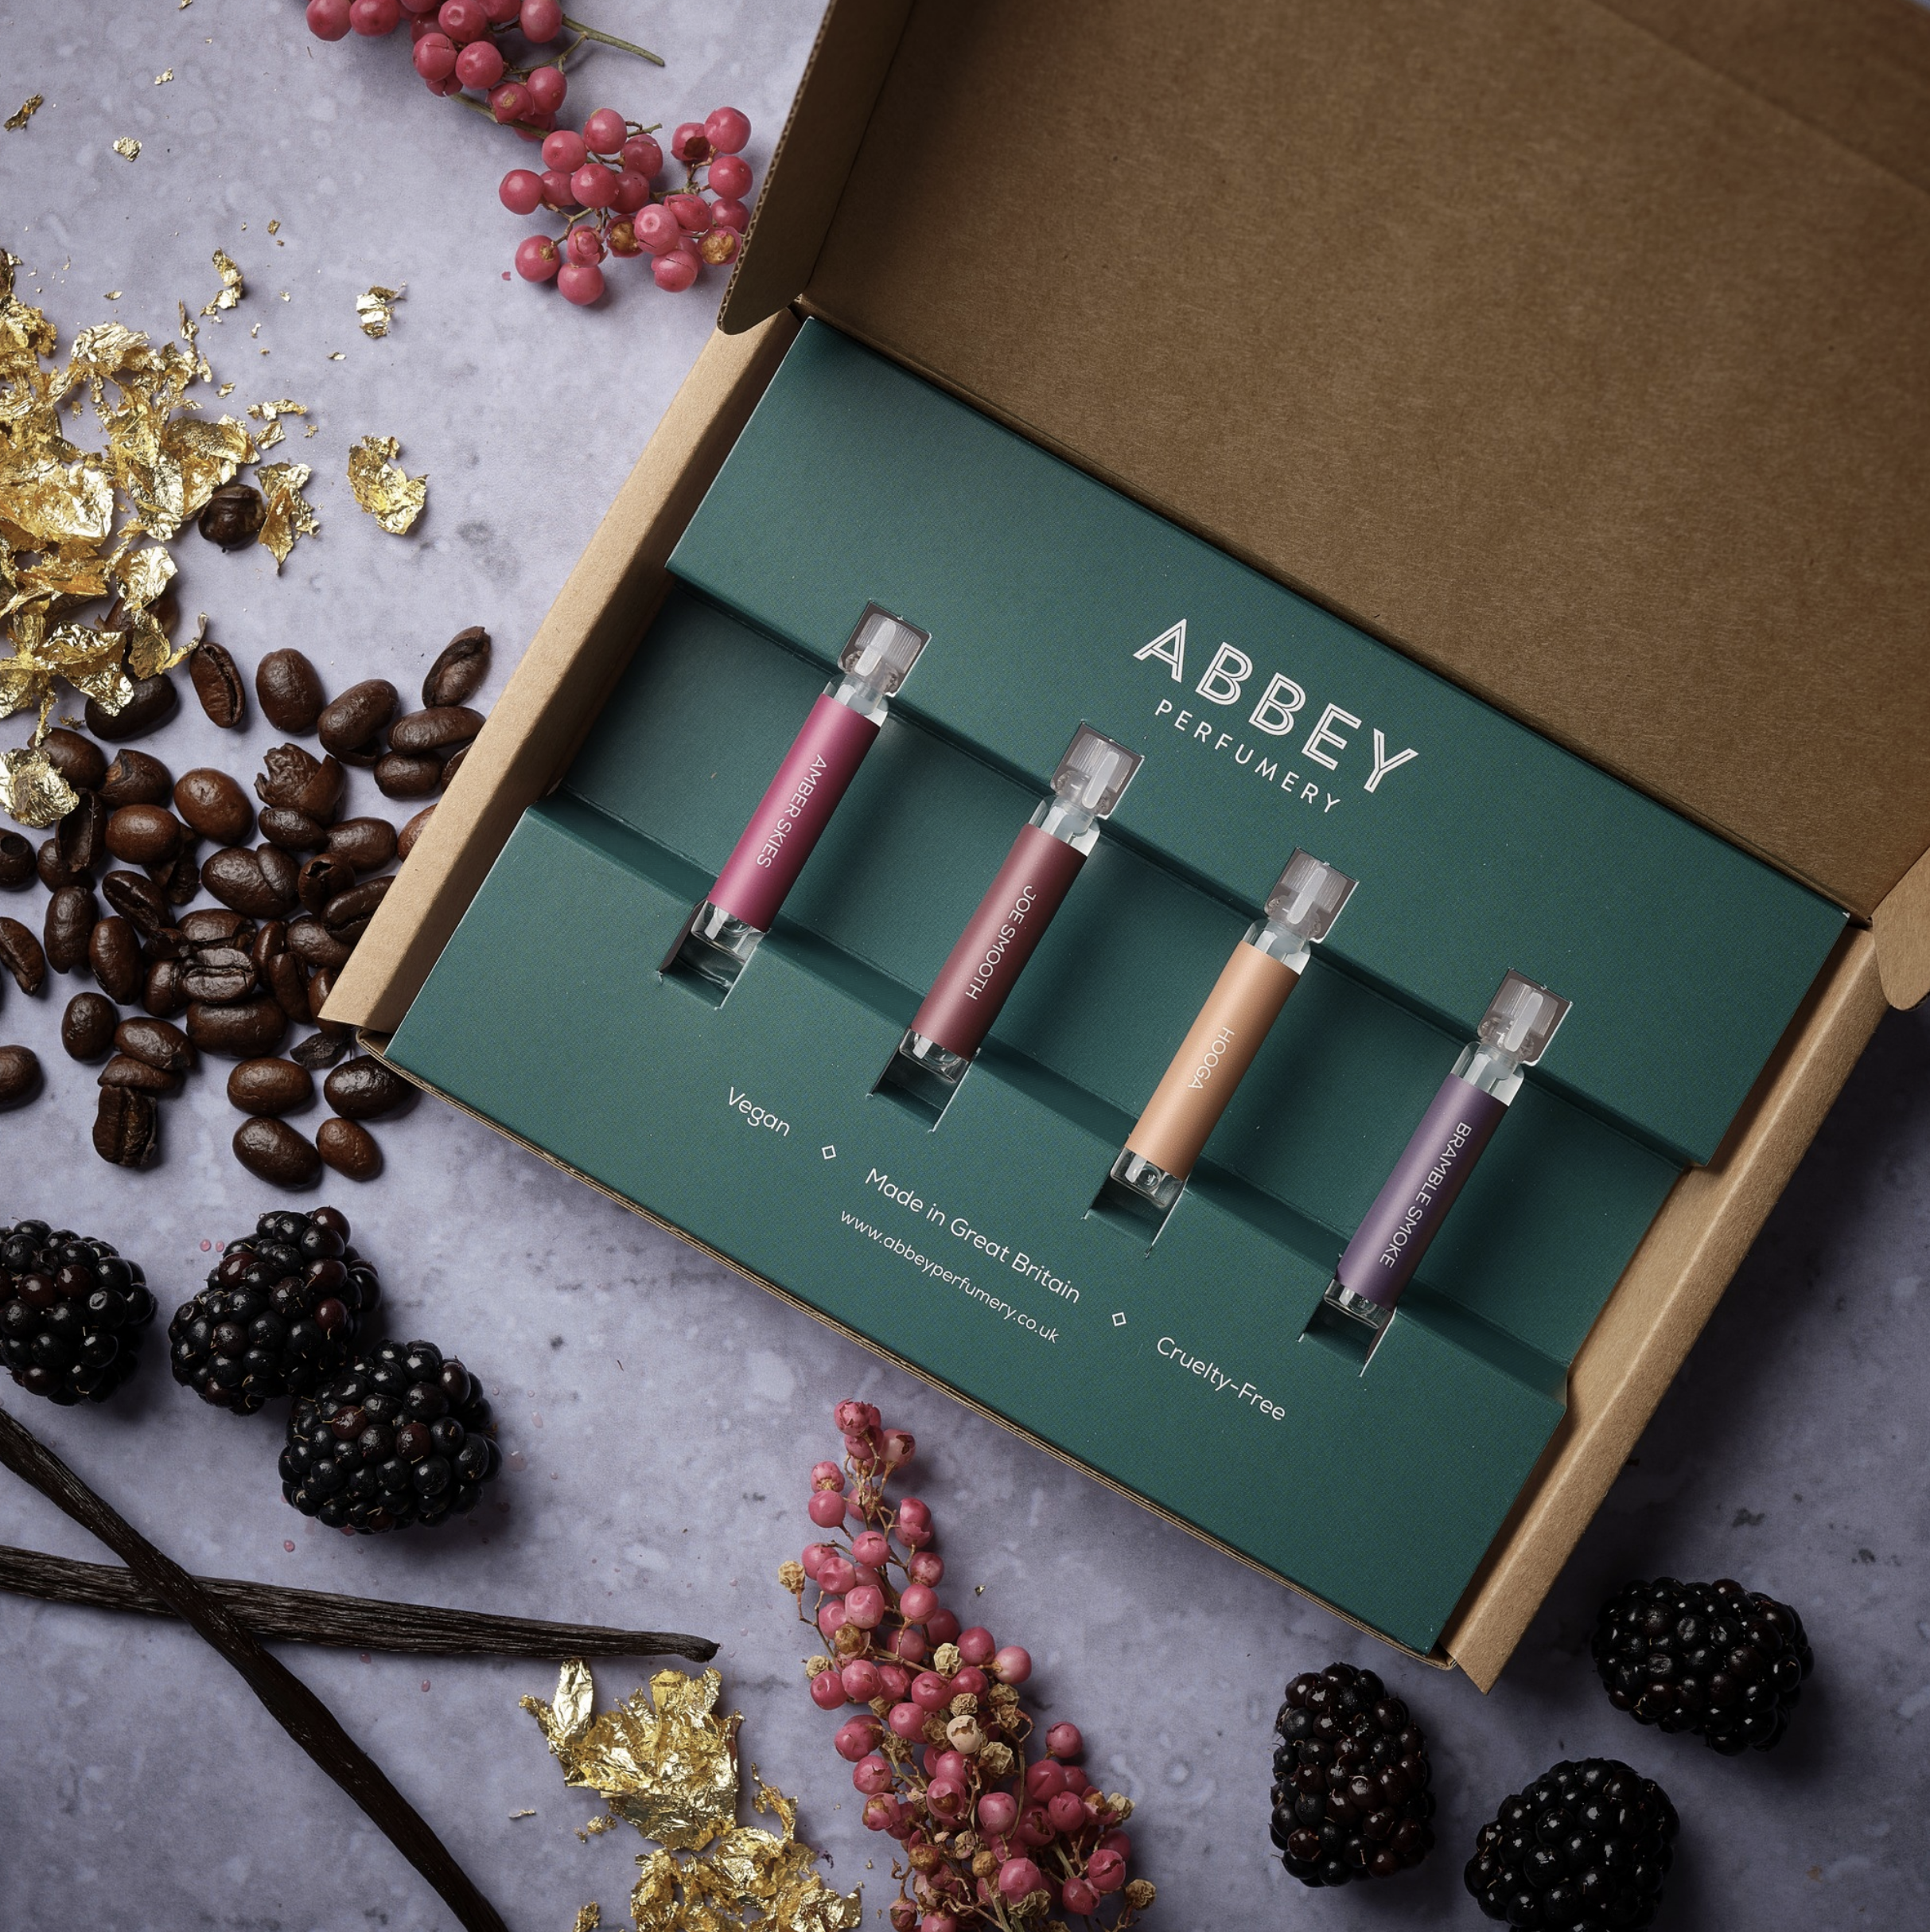 Abbey - green perfume box with Abbey logo design and branding